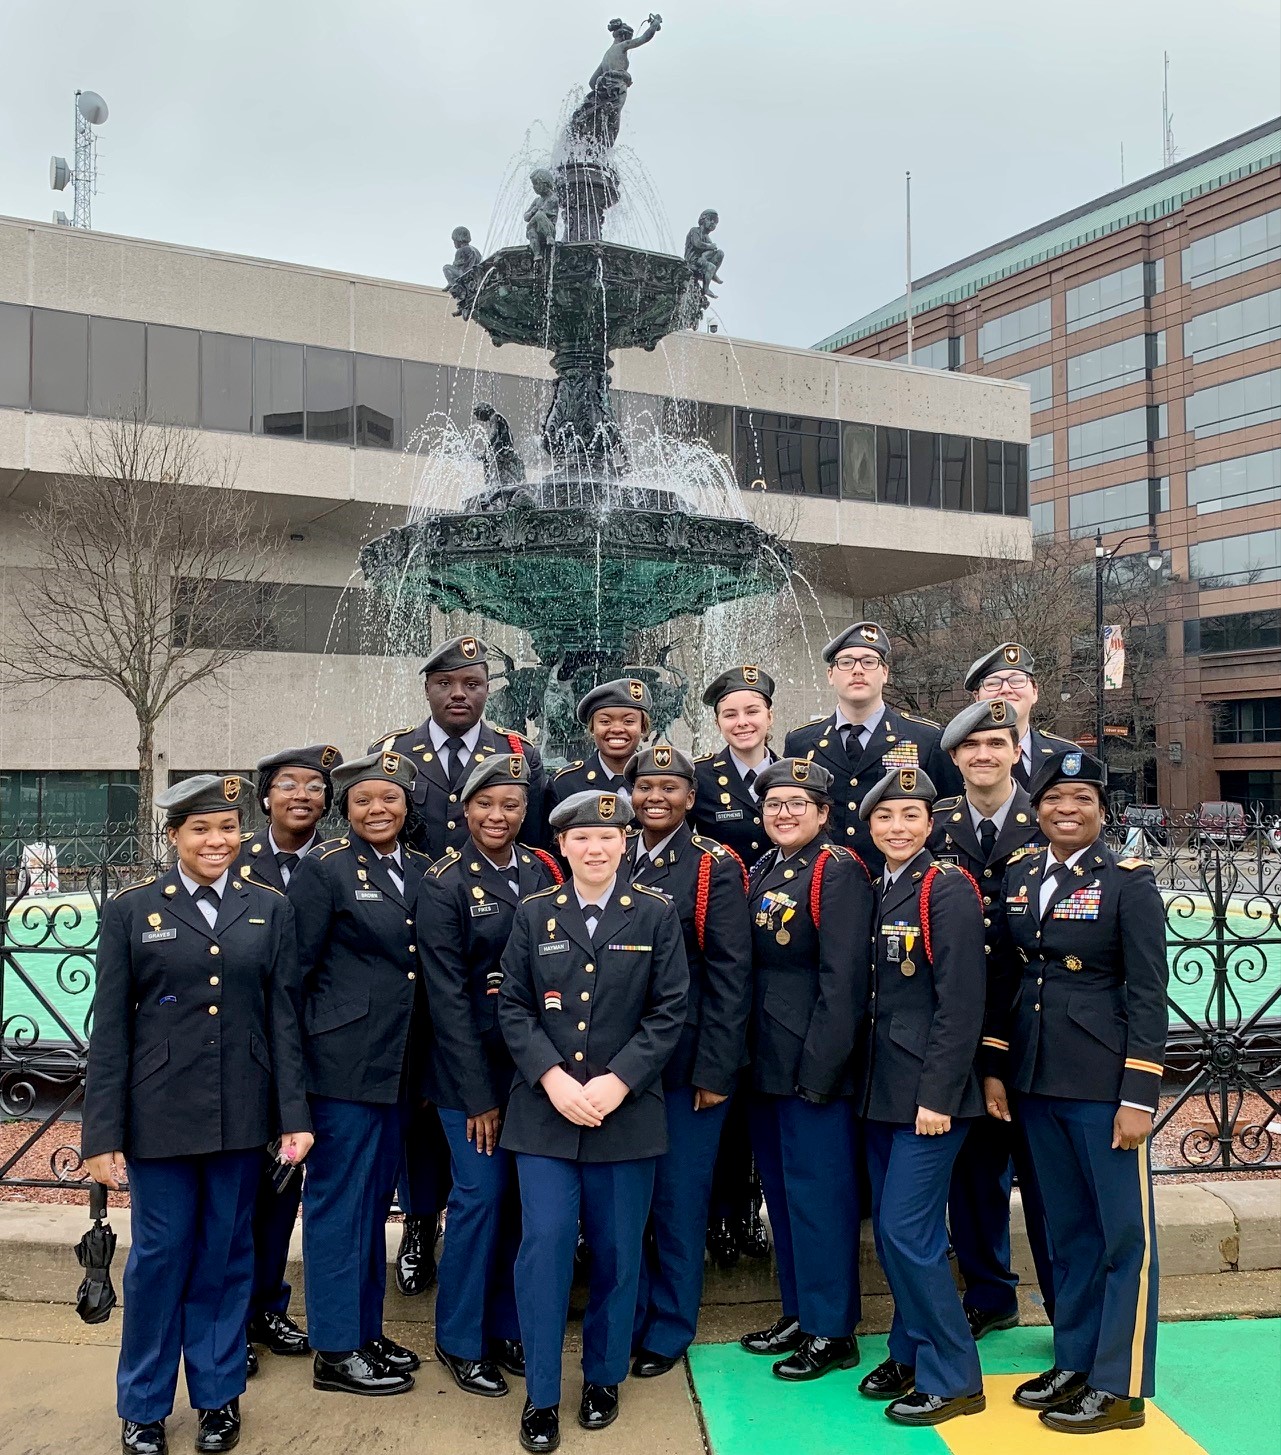 : Murphy JROTC cadets pose with the fountain at Rosa Parks Memorial on Dexter Avenue in Montgomery, Alabama.